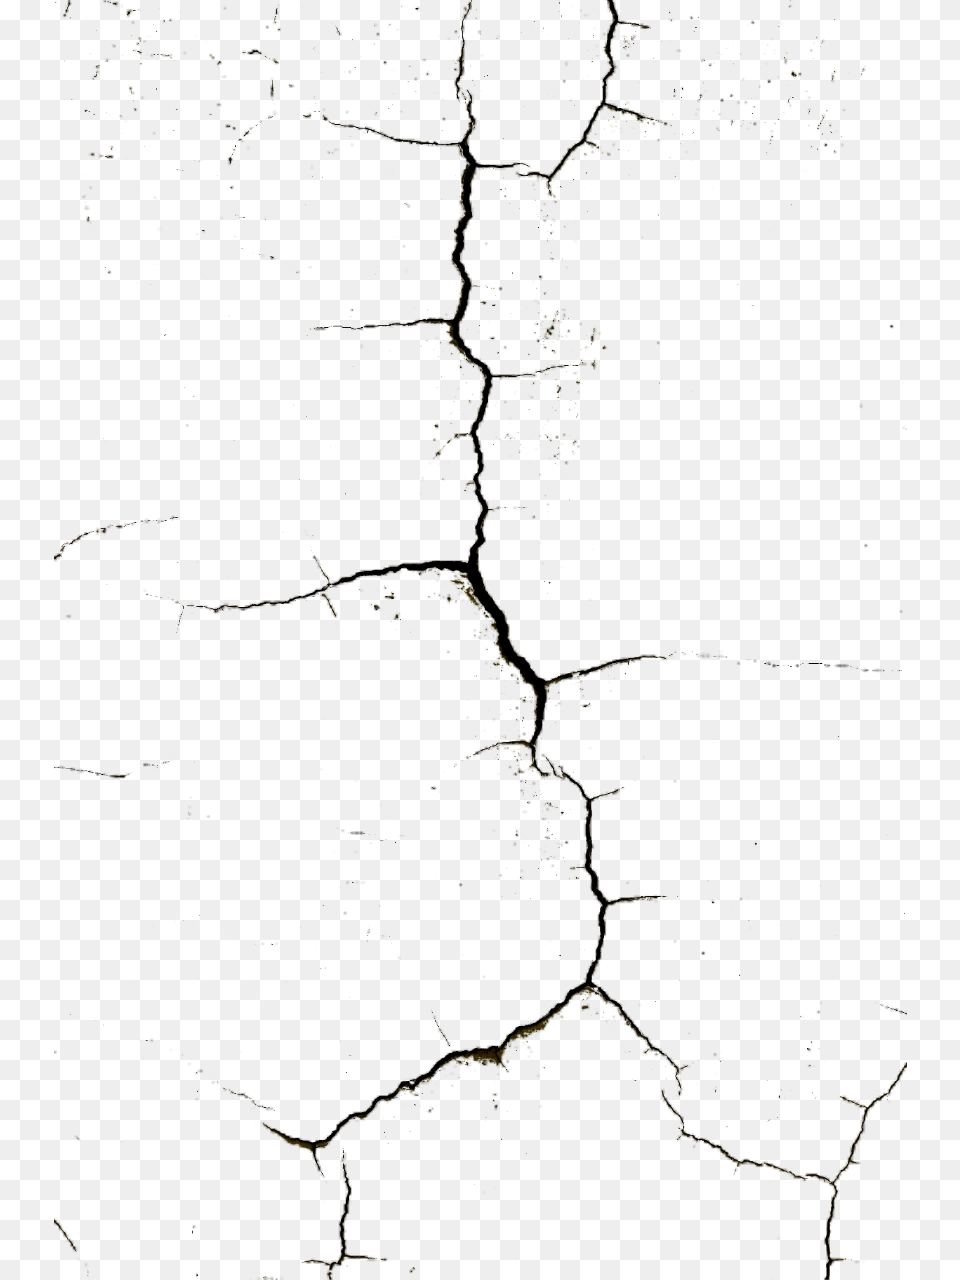 Popular And Trending Cracks Stickers, Texture, Outdoors, Nature Png